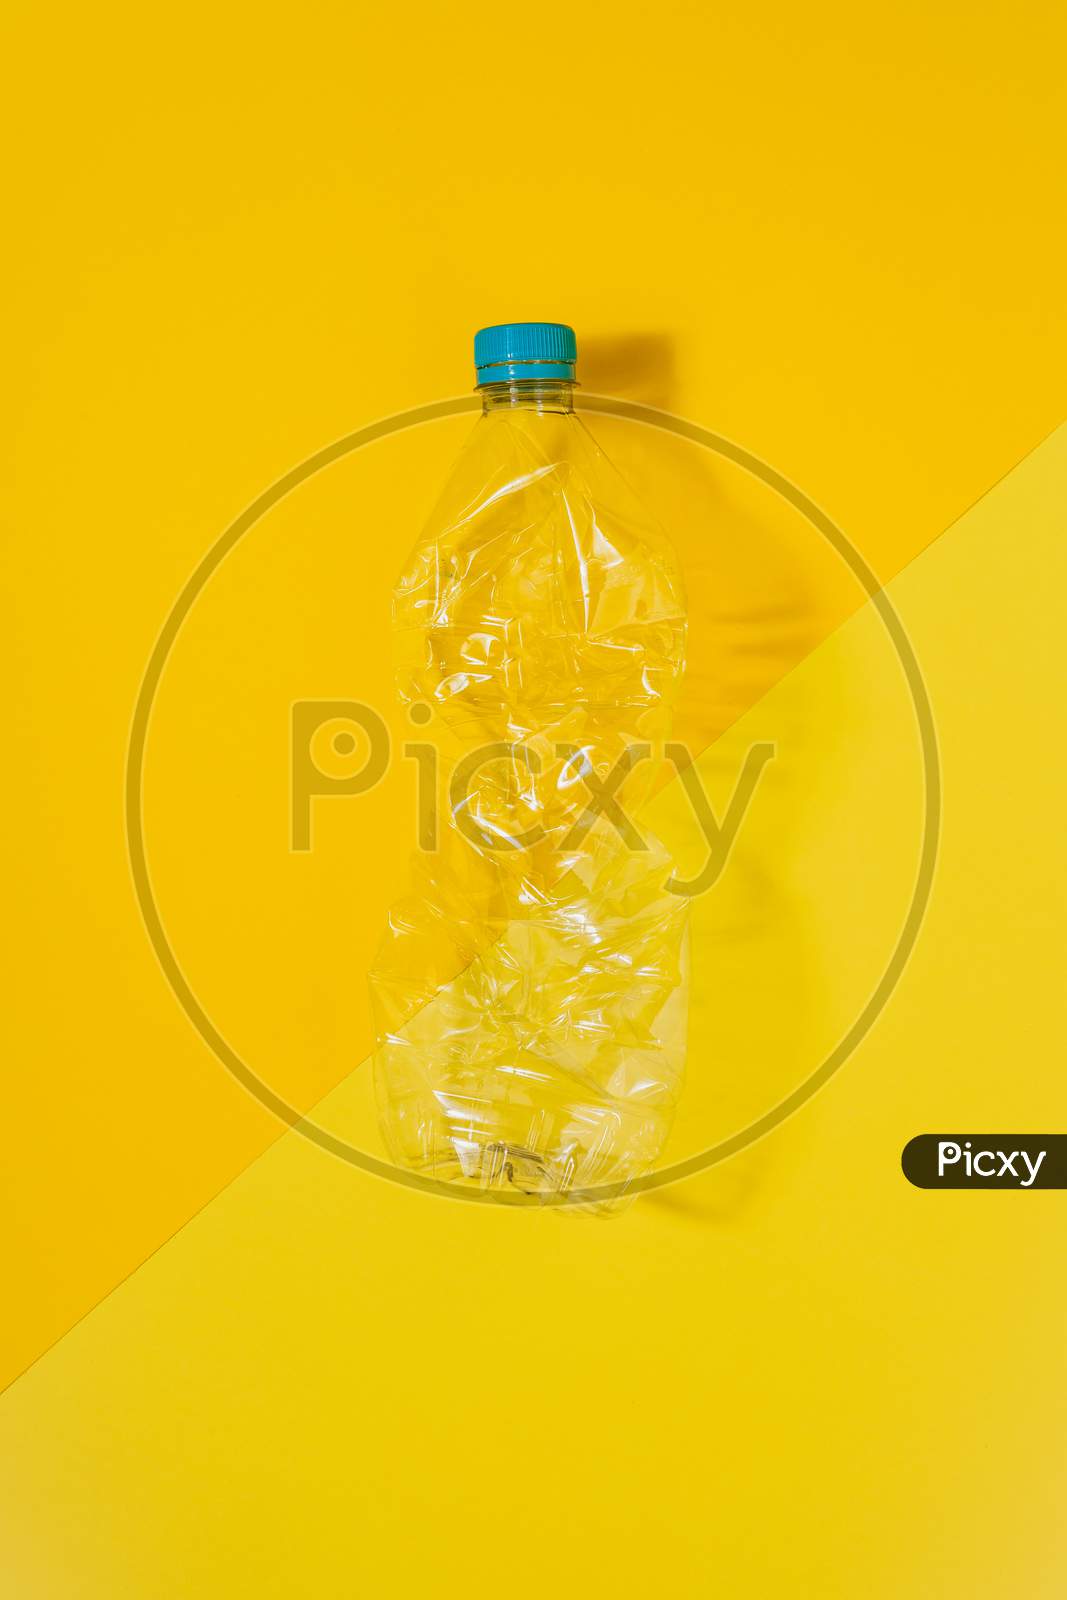 Transparent And Crushed Plastic Bottle With Blue Cap On A Yellow Background. Recycling And Environment Concept.